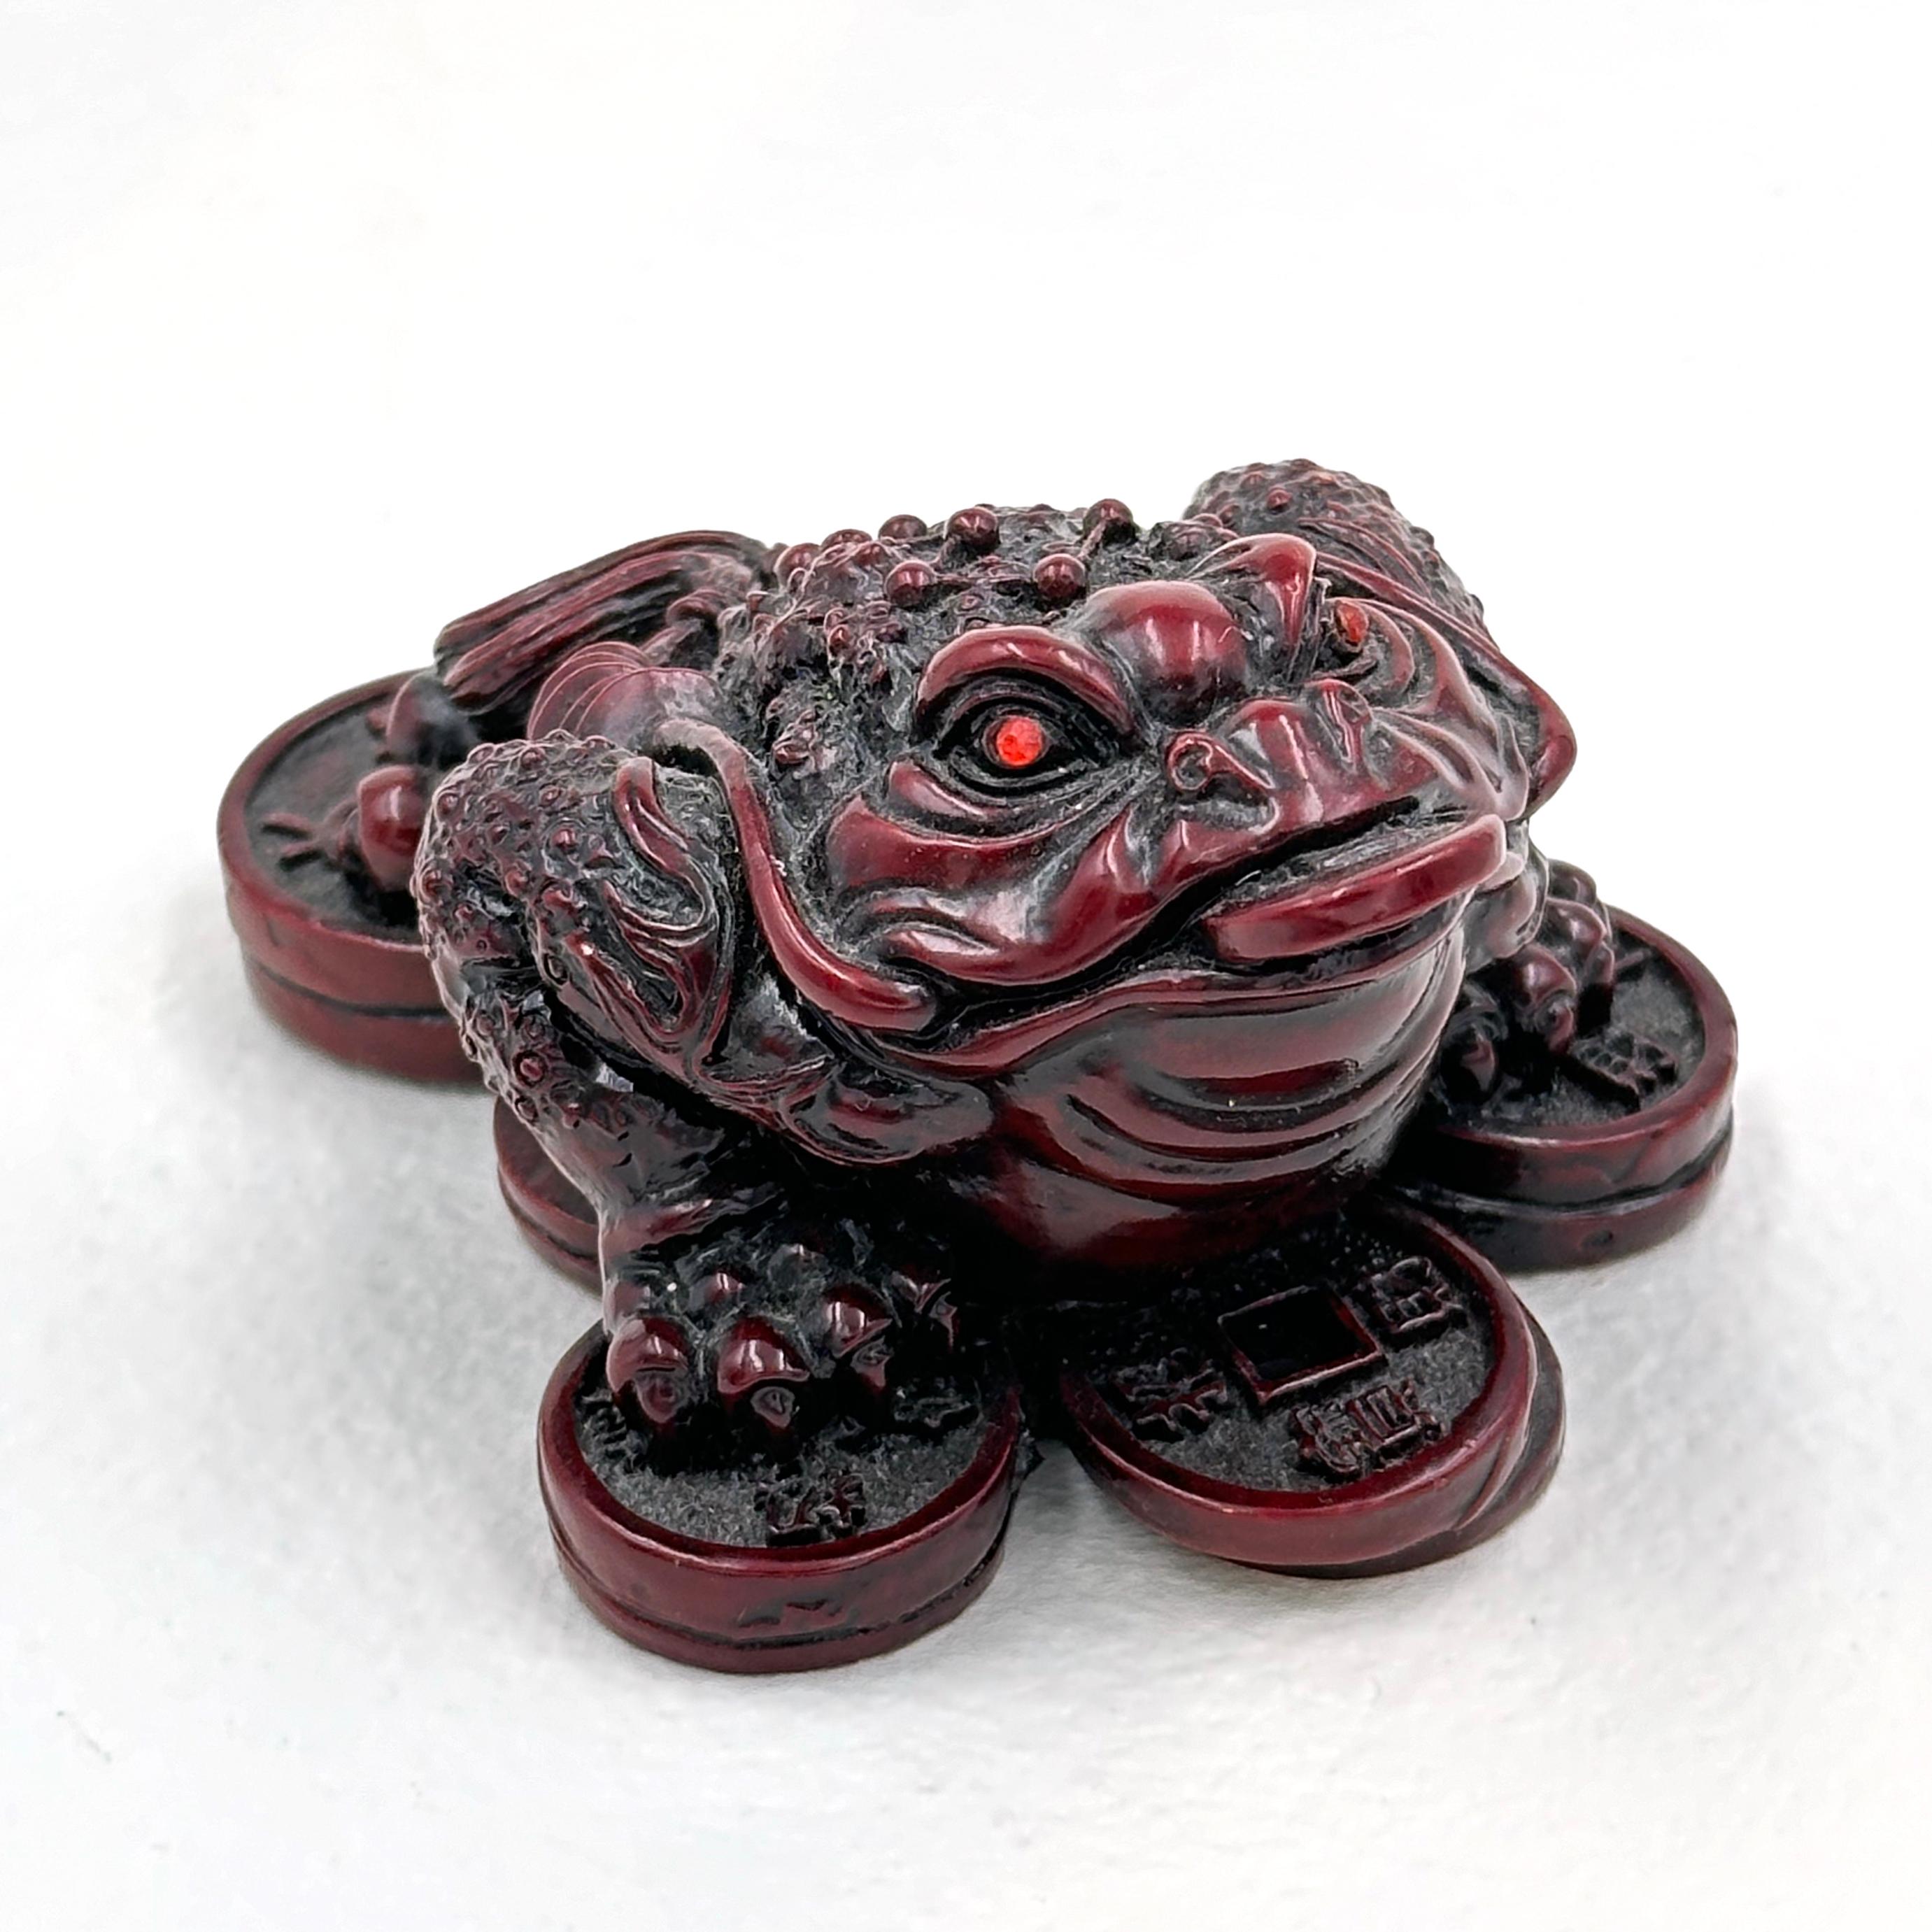 Feng Shui Good Luck Toad - Sculpture by Unknown